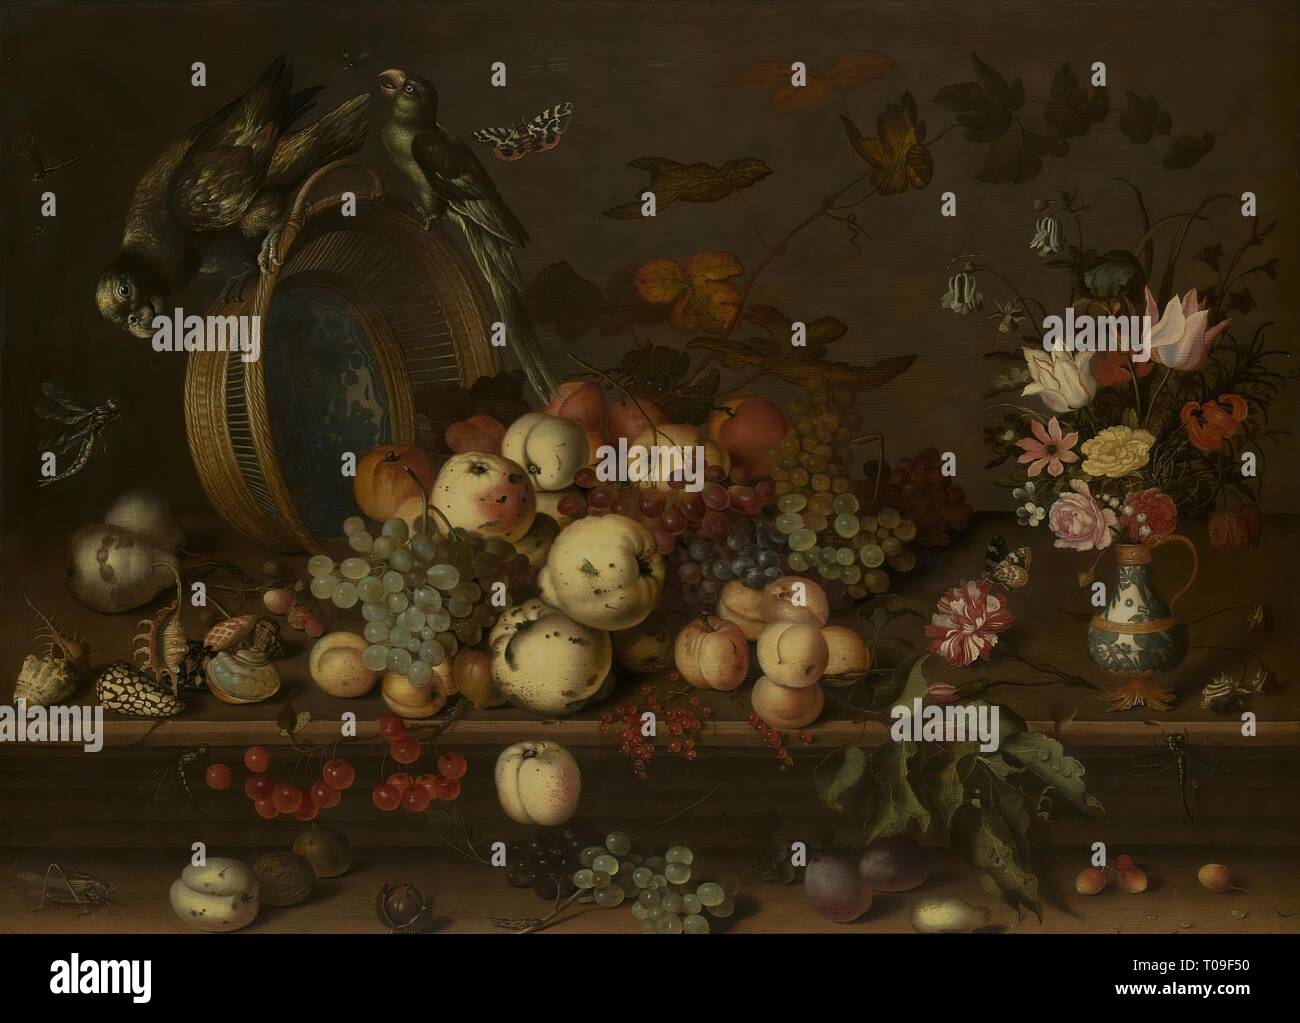 'Still Life with Fruit, Overturned Basket and Bouquet of Flowers in a Vase'. Holland, Circa 1625. Dimensions: 75x104 cm. Museum: State Hermitage, St. Petersburg. Author: BALTHASAR VAN DER AST . Balthasar van der Ast. Stock Photo